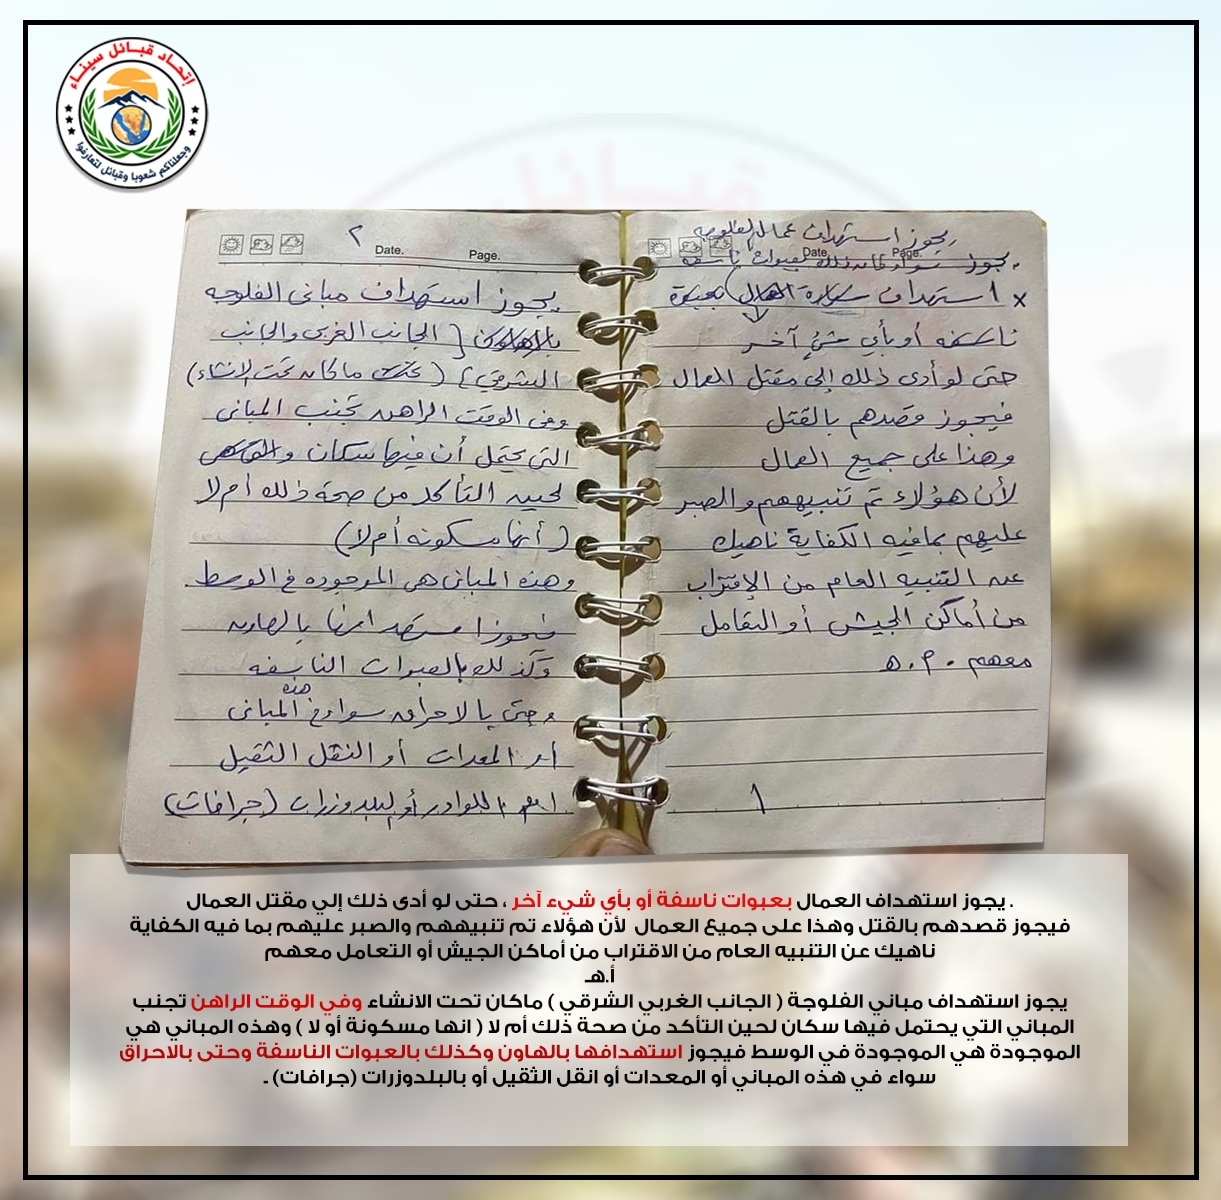 a recovered ISS document by the Tribal Militias, leaders detail the importance of striking at infrastructure in Sinai, Egypt